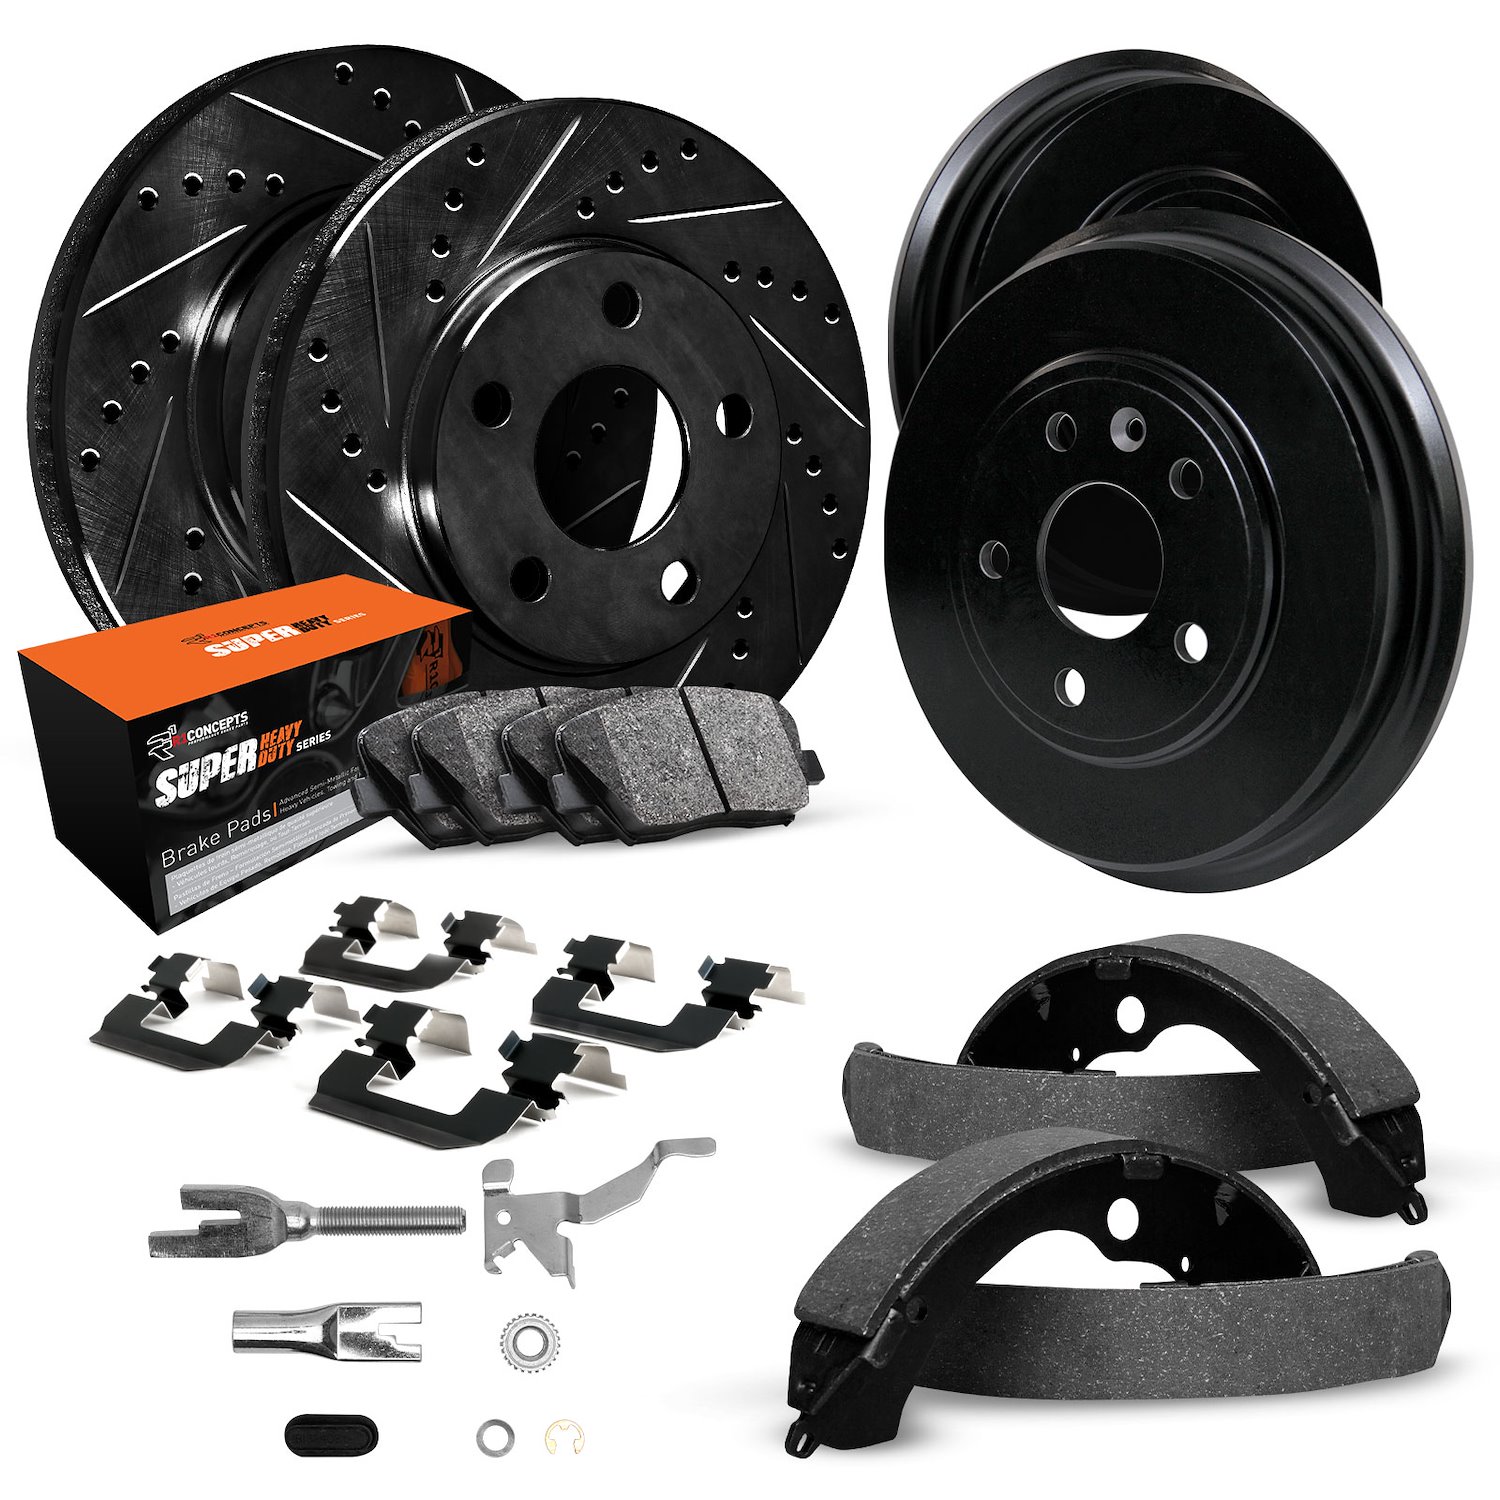 E-Line Slotted Black Brake Rotor & Drum Set w/Super-Duty Pads, Shoes, Hardware/Adjusters, 1997-2002 Ford/Lincoln/Mercury/Mazda